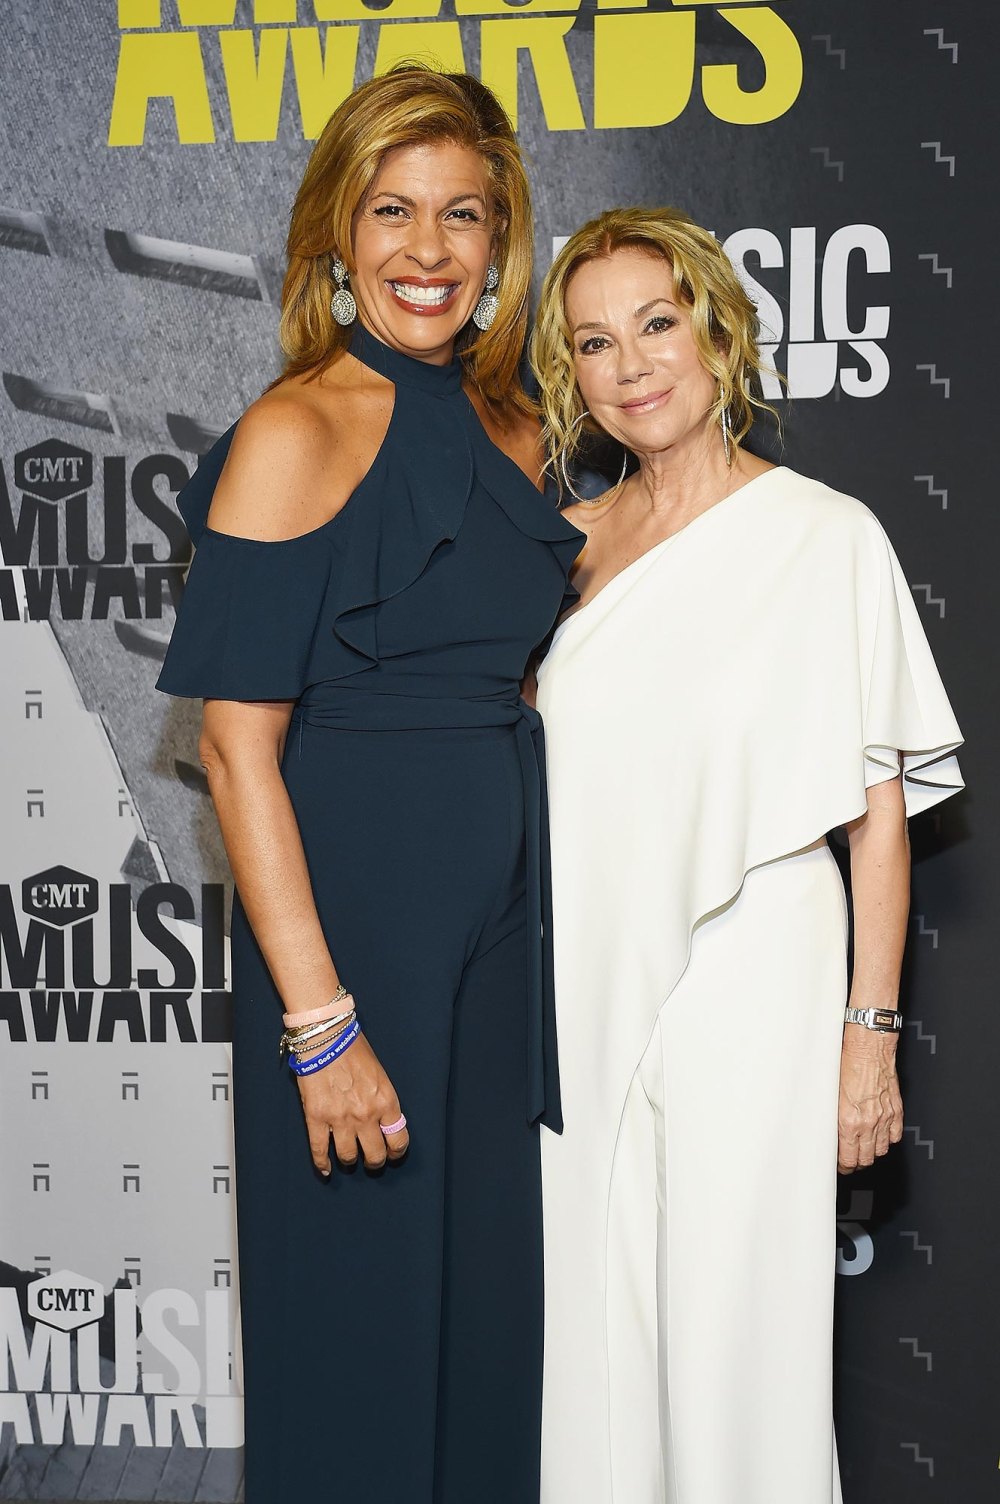 Hoda Kotb Gives an Update on Former Today Co-Host Kathie Lee Gifford 5 Years After Her Exit